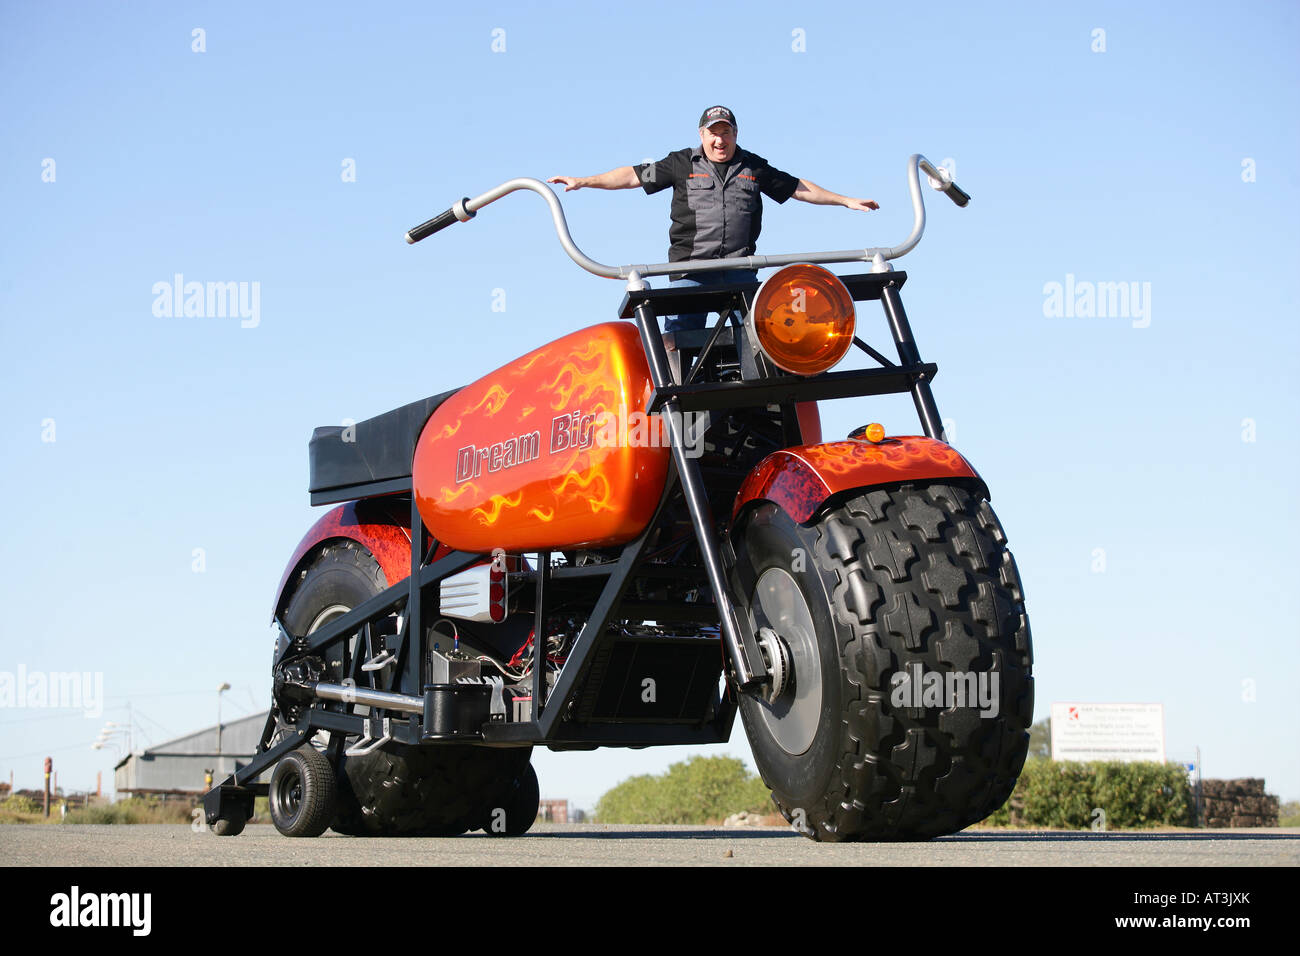 The worlds biggest motorbike in 2007. pleae check to see if it still is. Stock Photo